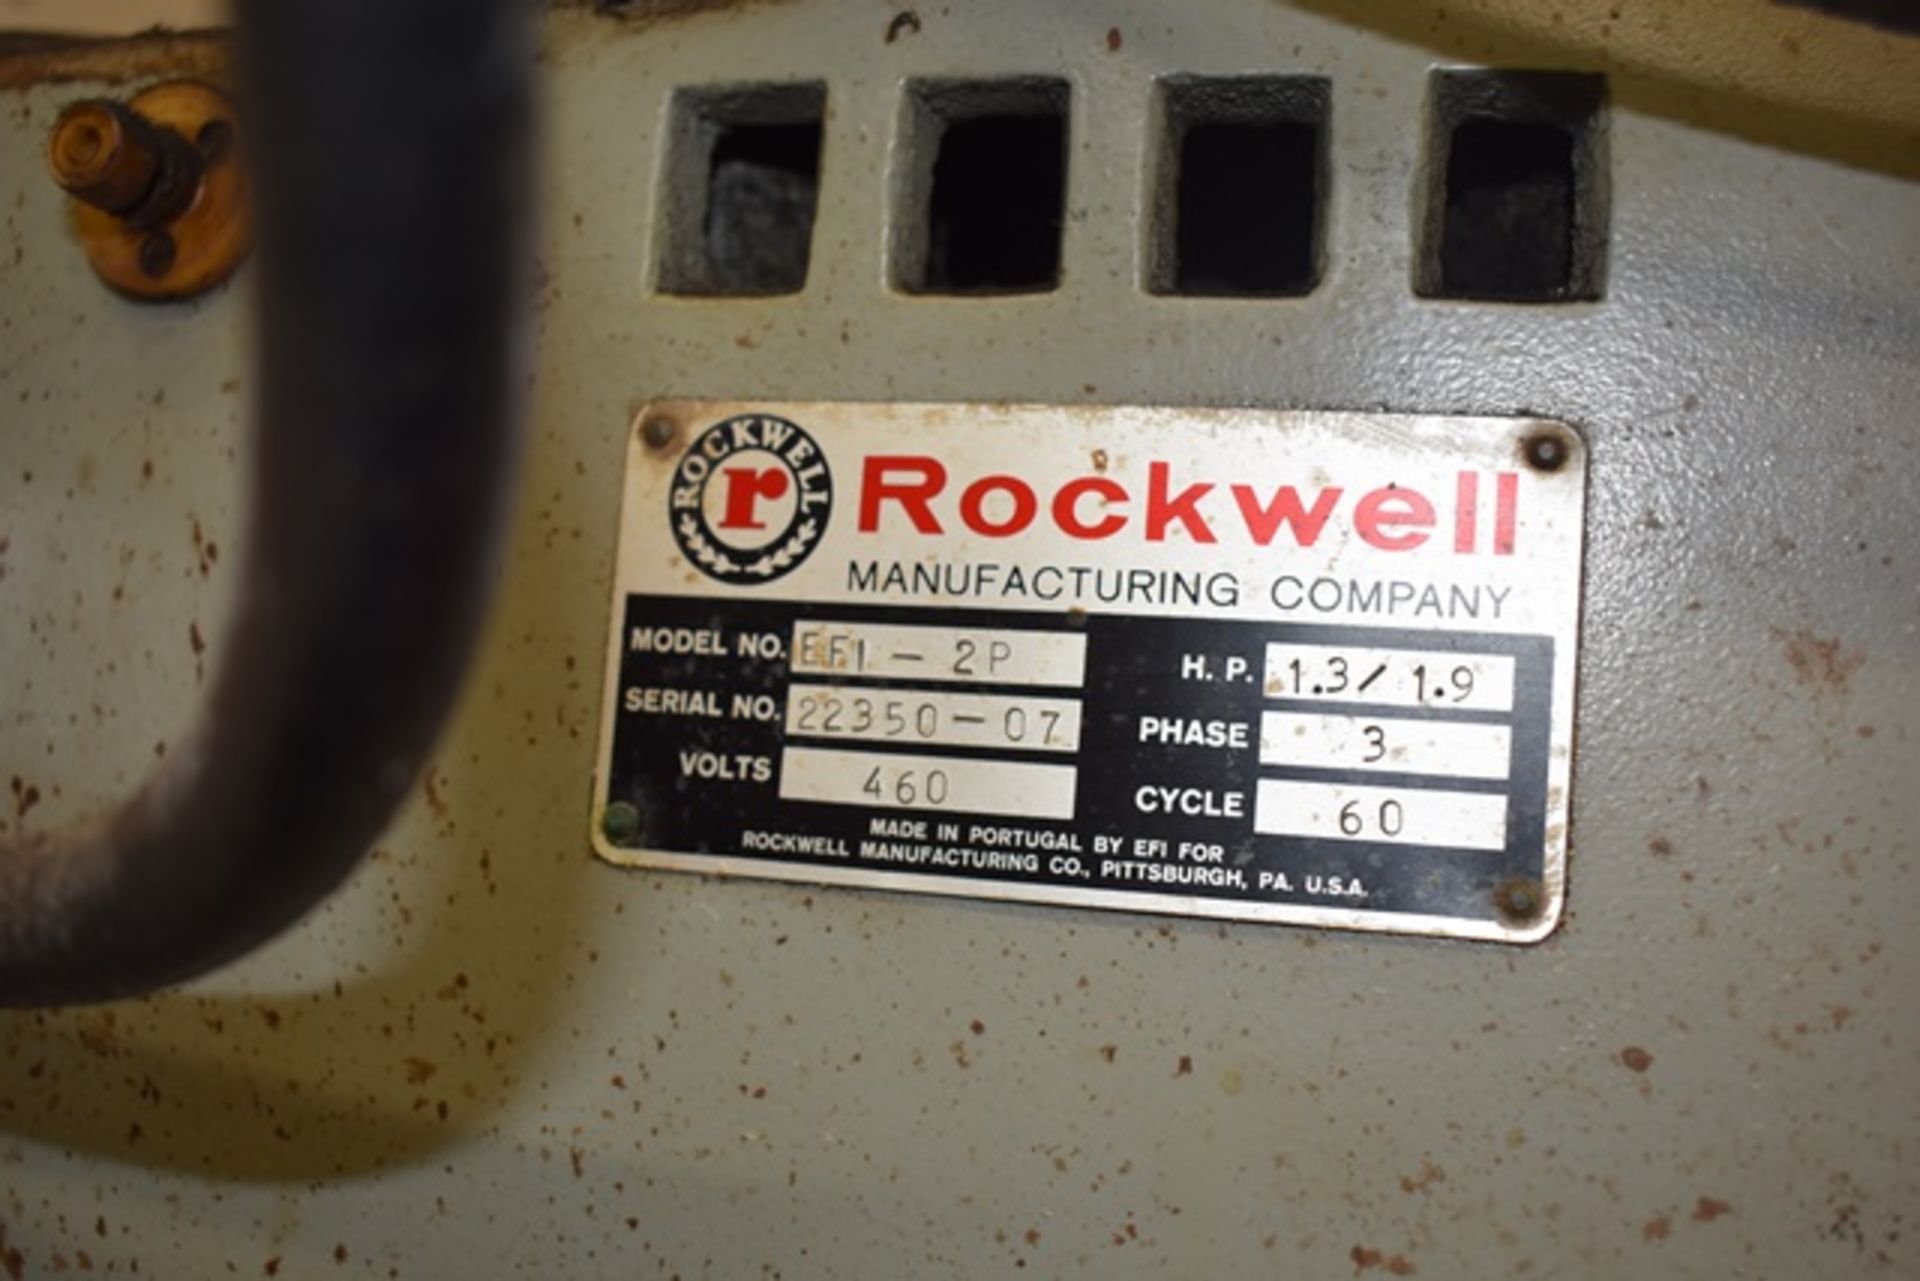 Rockwell drill press, mod. EFI-2P, s/n 22350-07 - Image 3 of 3